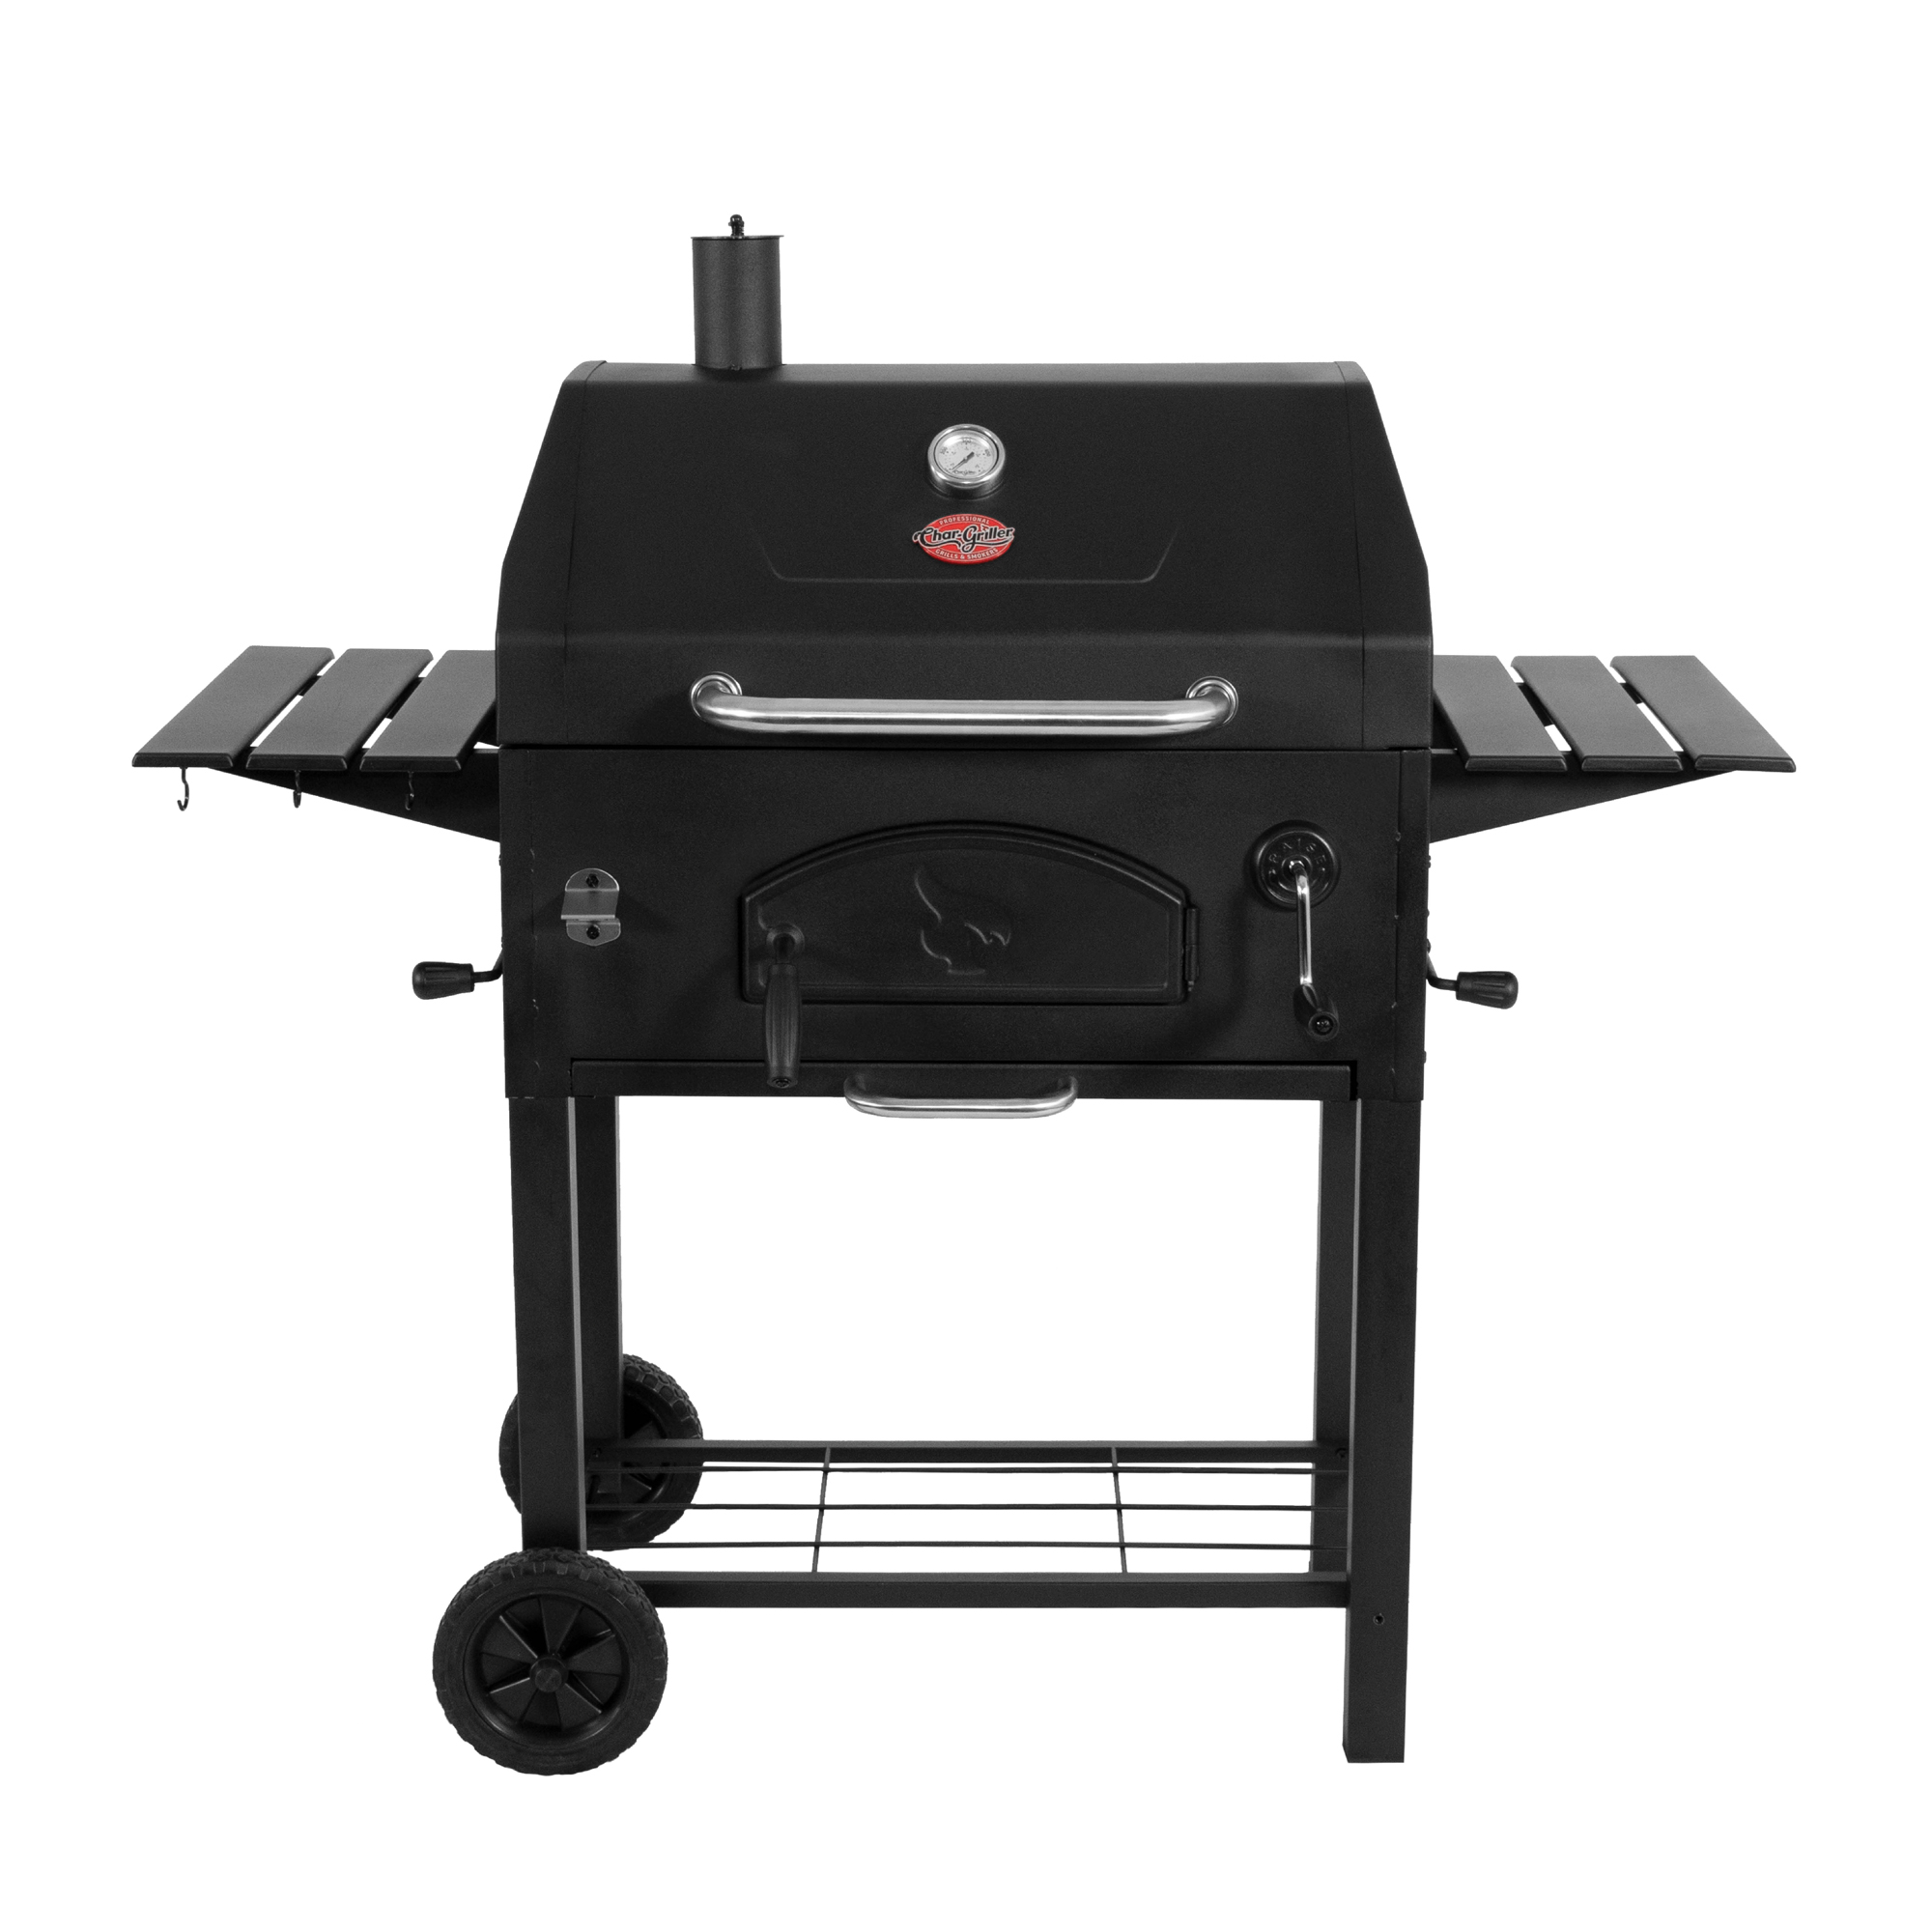 Char-Griller Traditional Charcoal Grill, Black - image 1 of 15